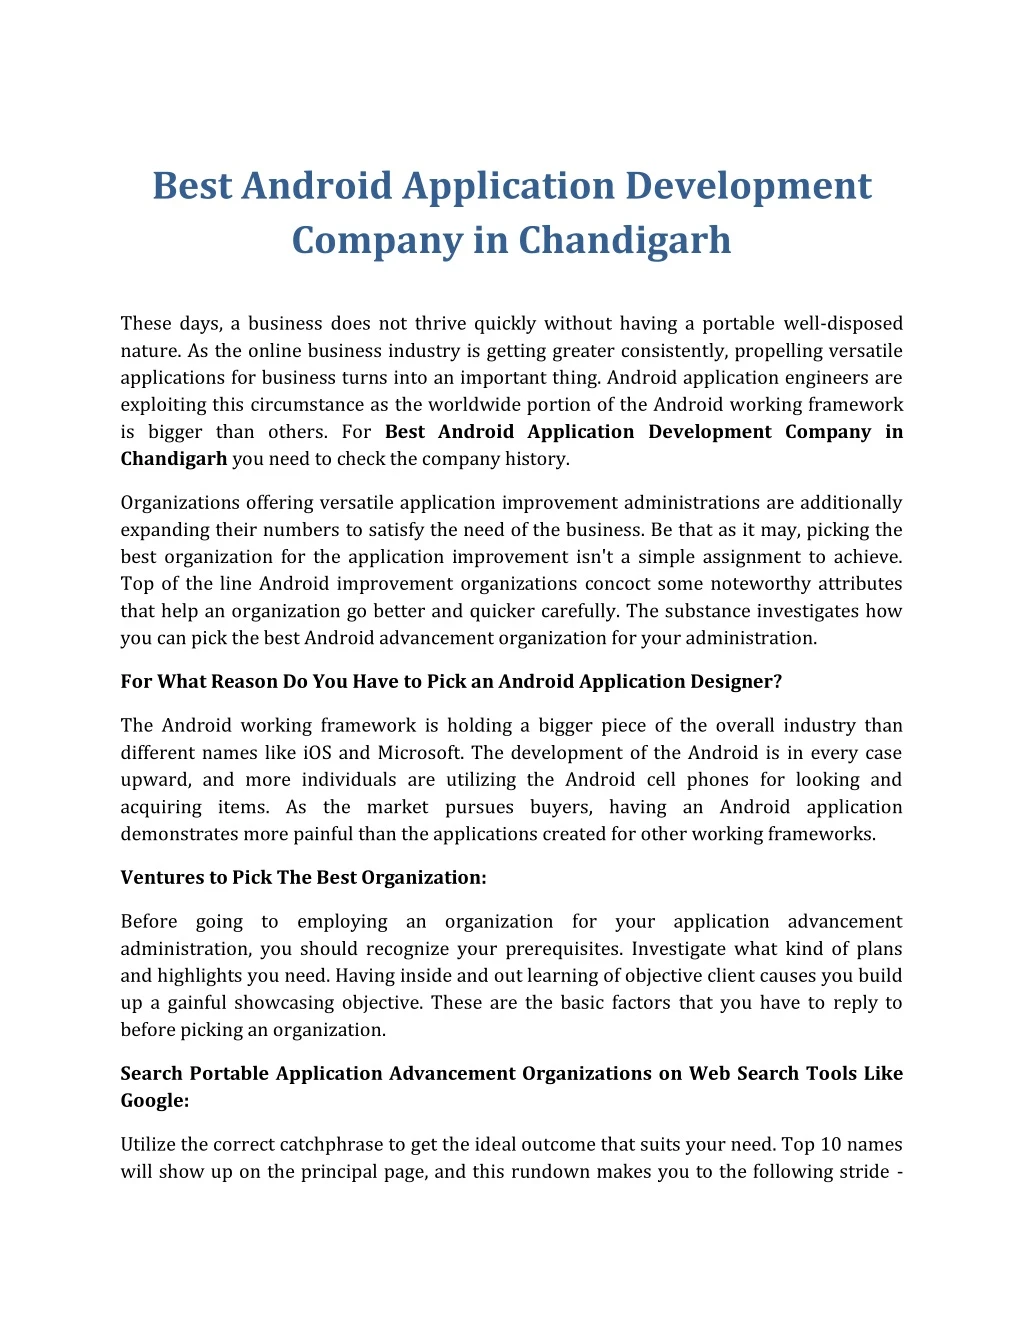 best android application development company